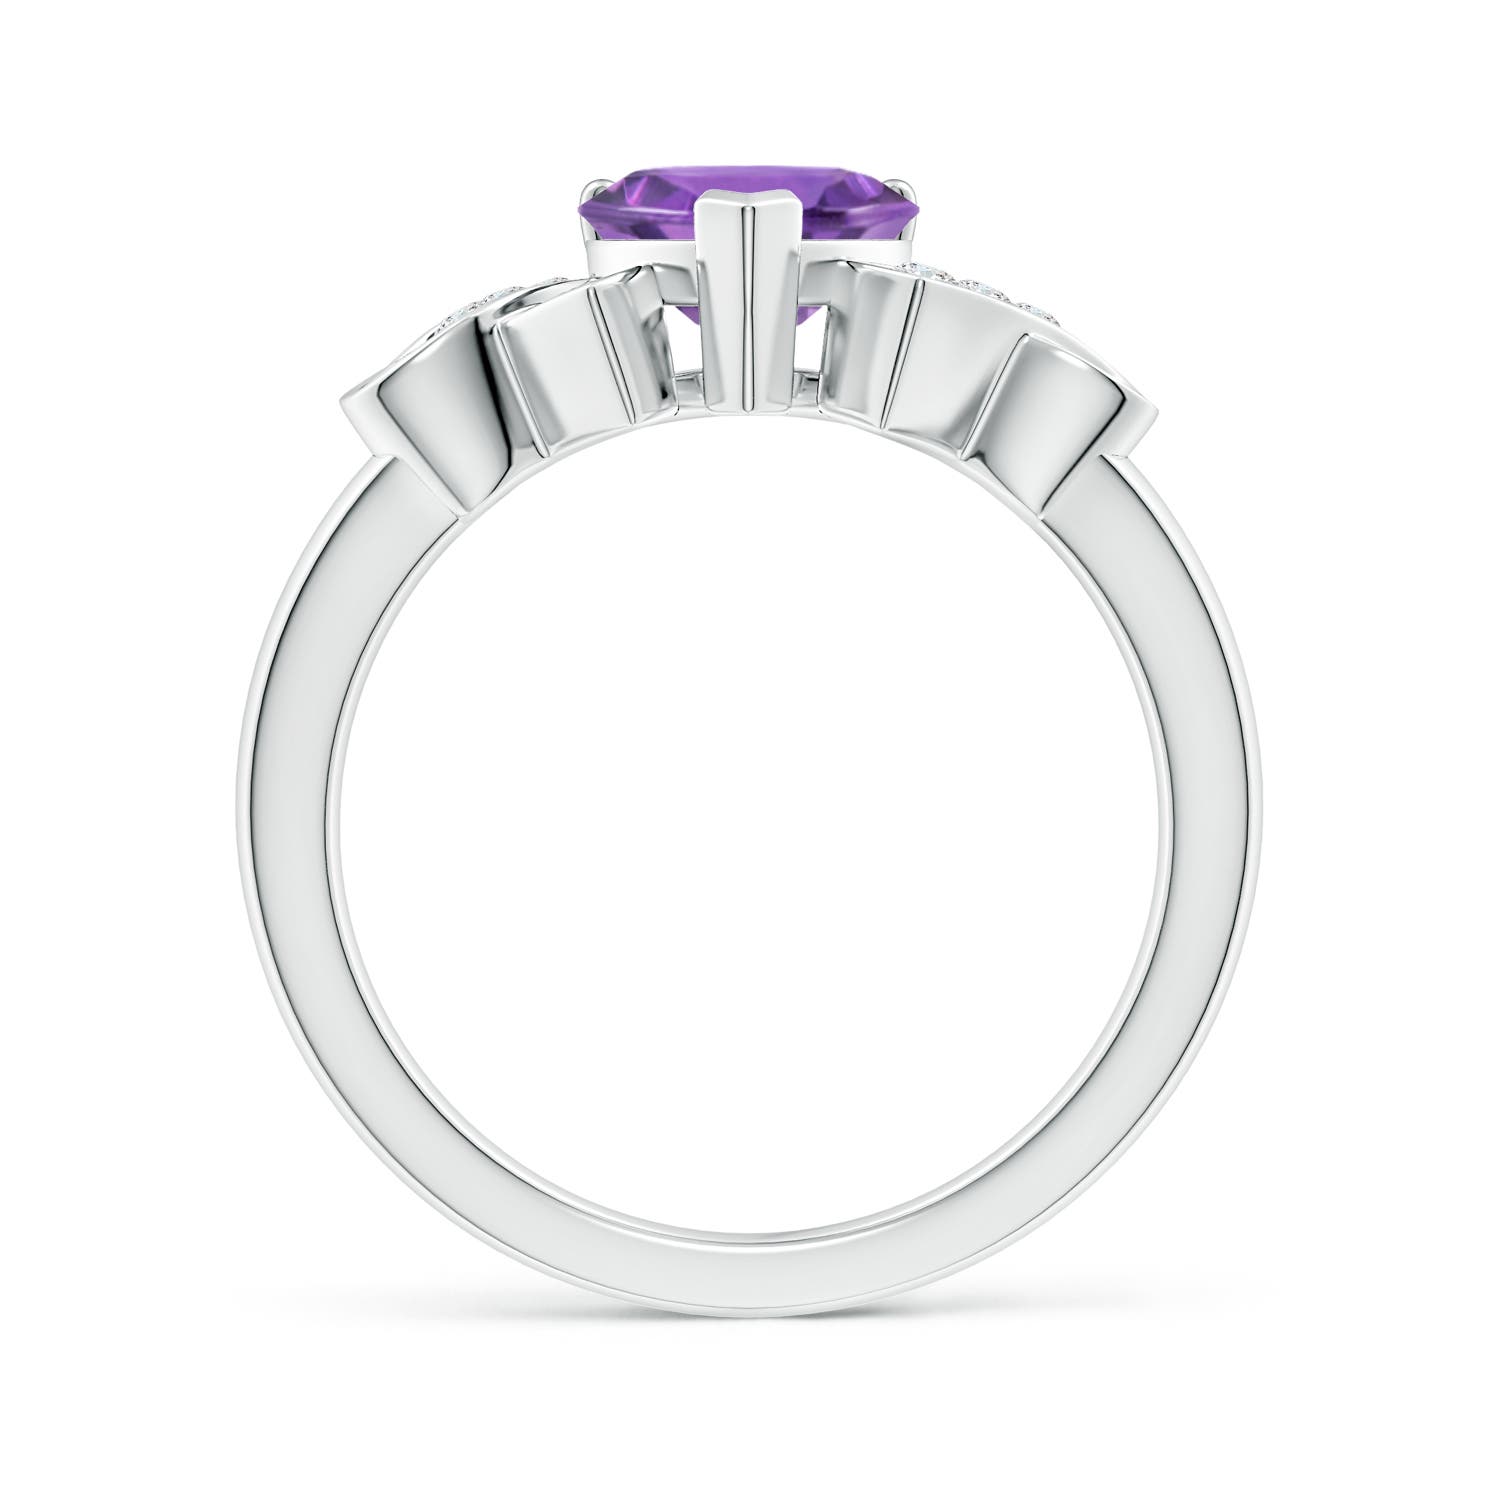 AA - Amethyst / 1.17 CT / 14 KT White Gold